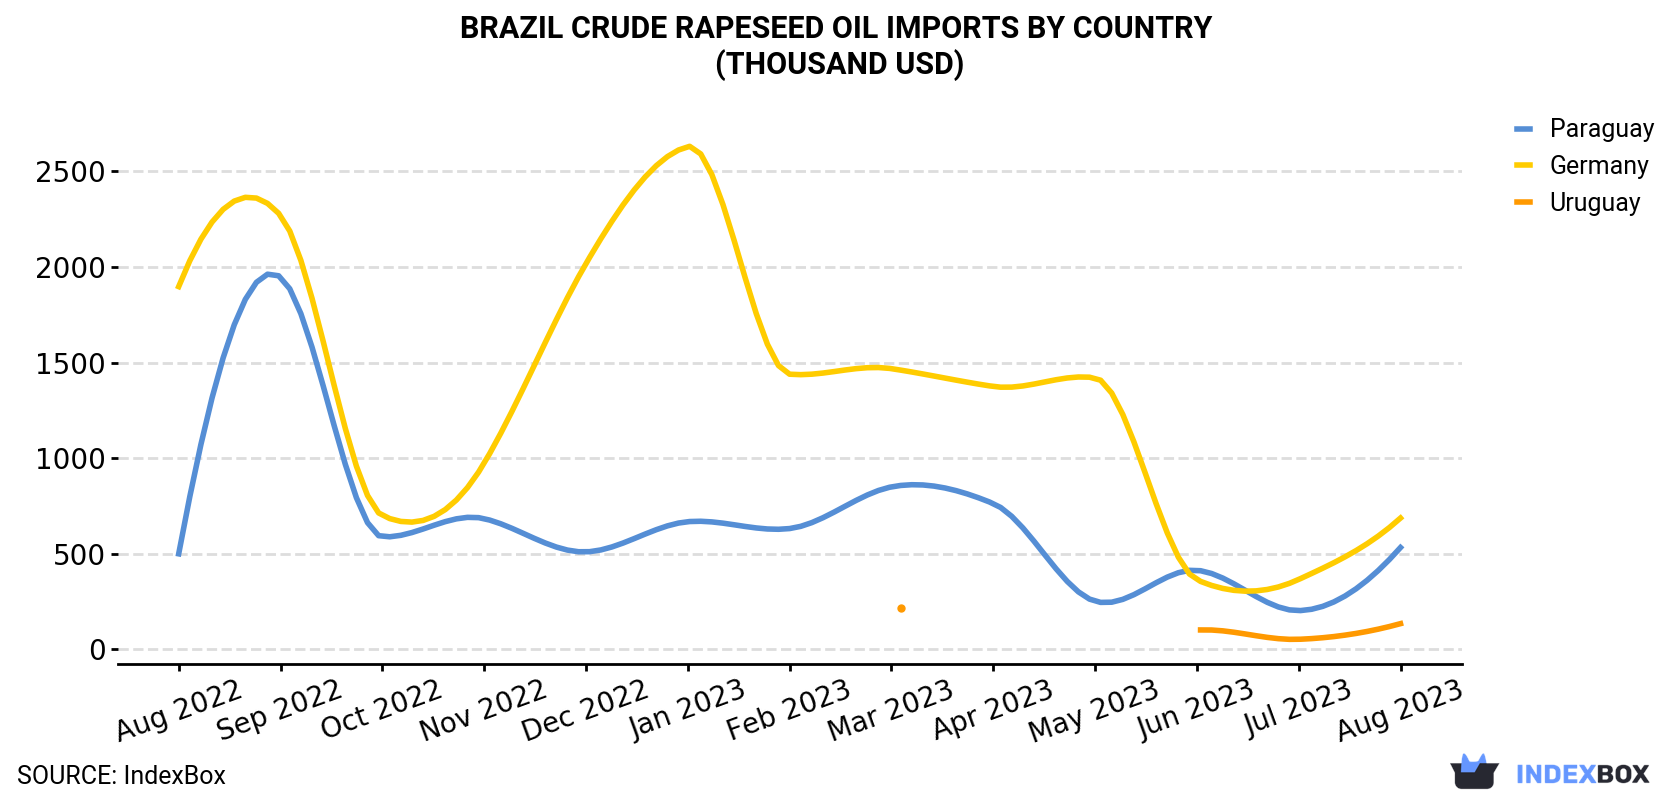 Brazil Crude Rapeseed Oil Imports By Country (Thousand USD)